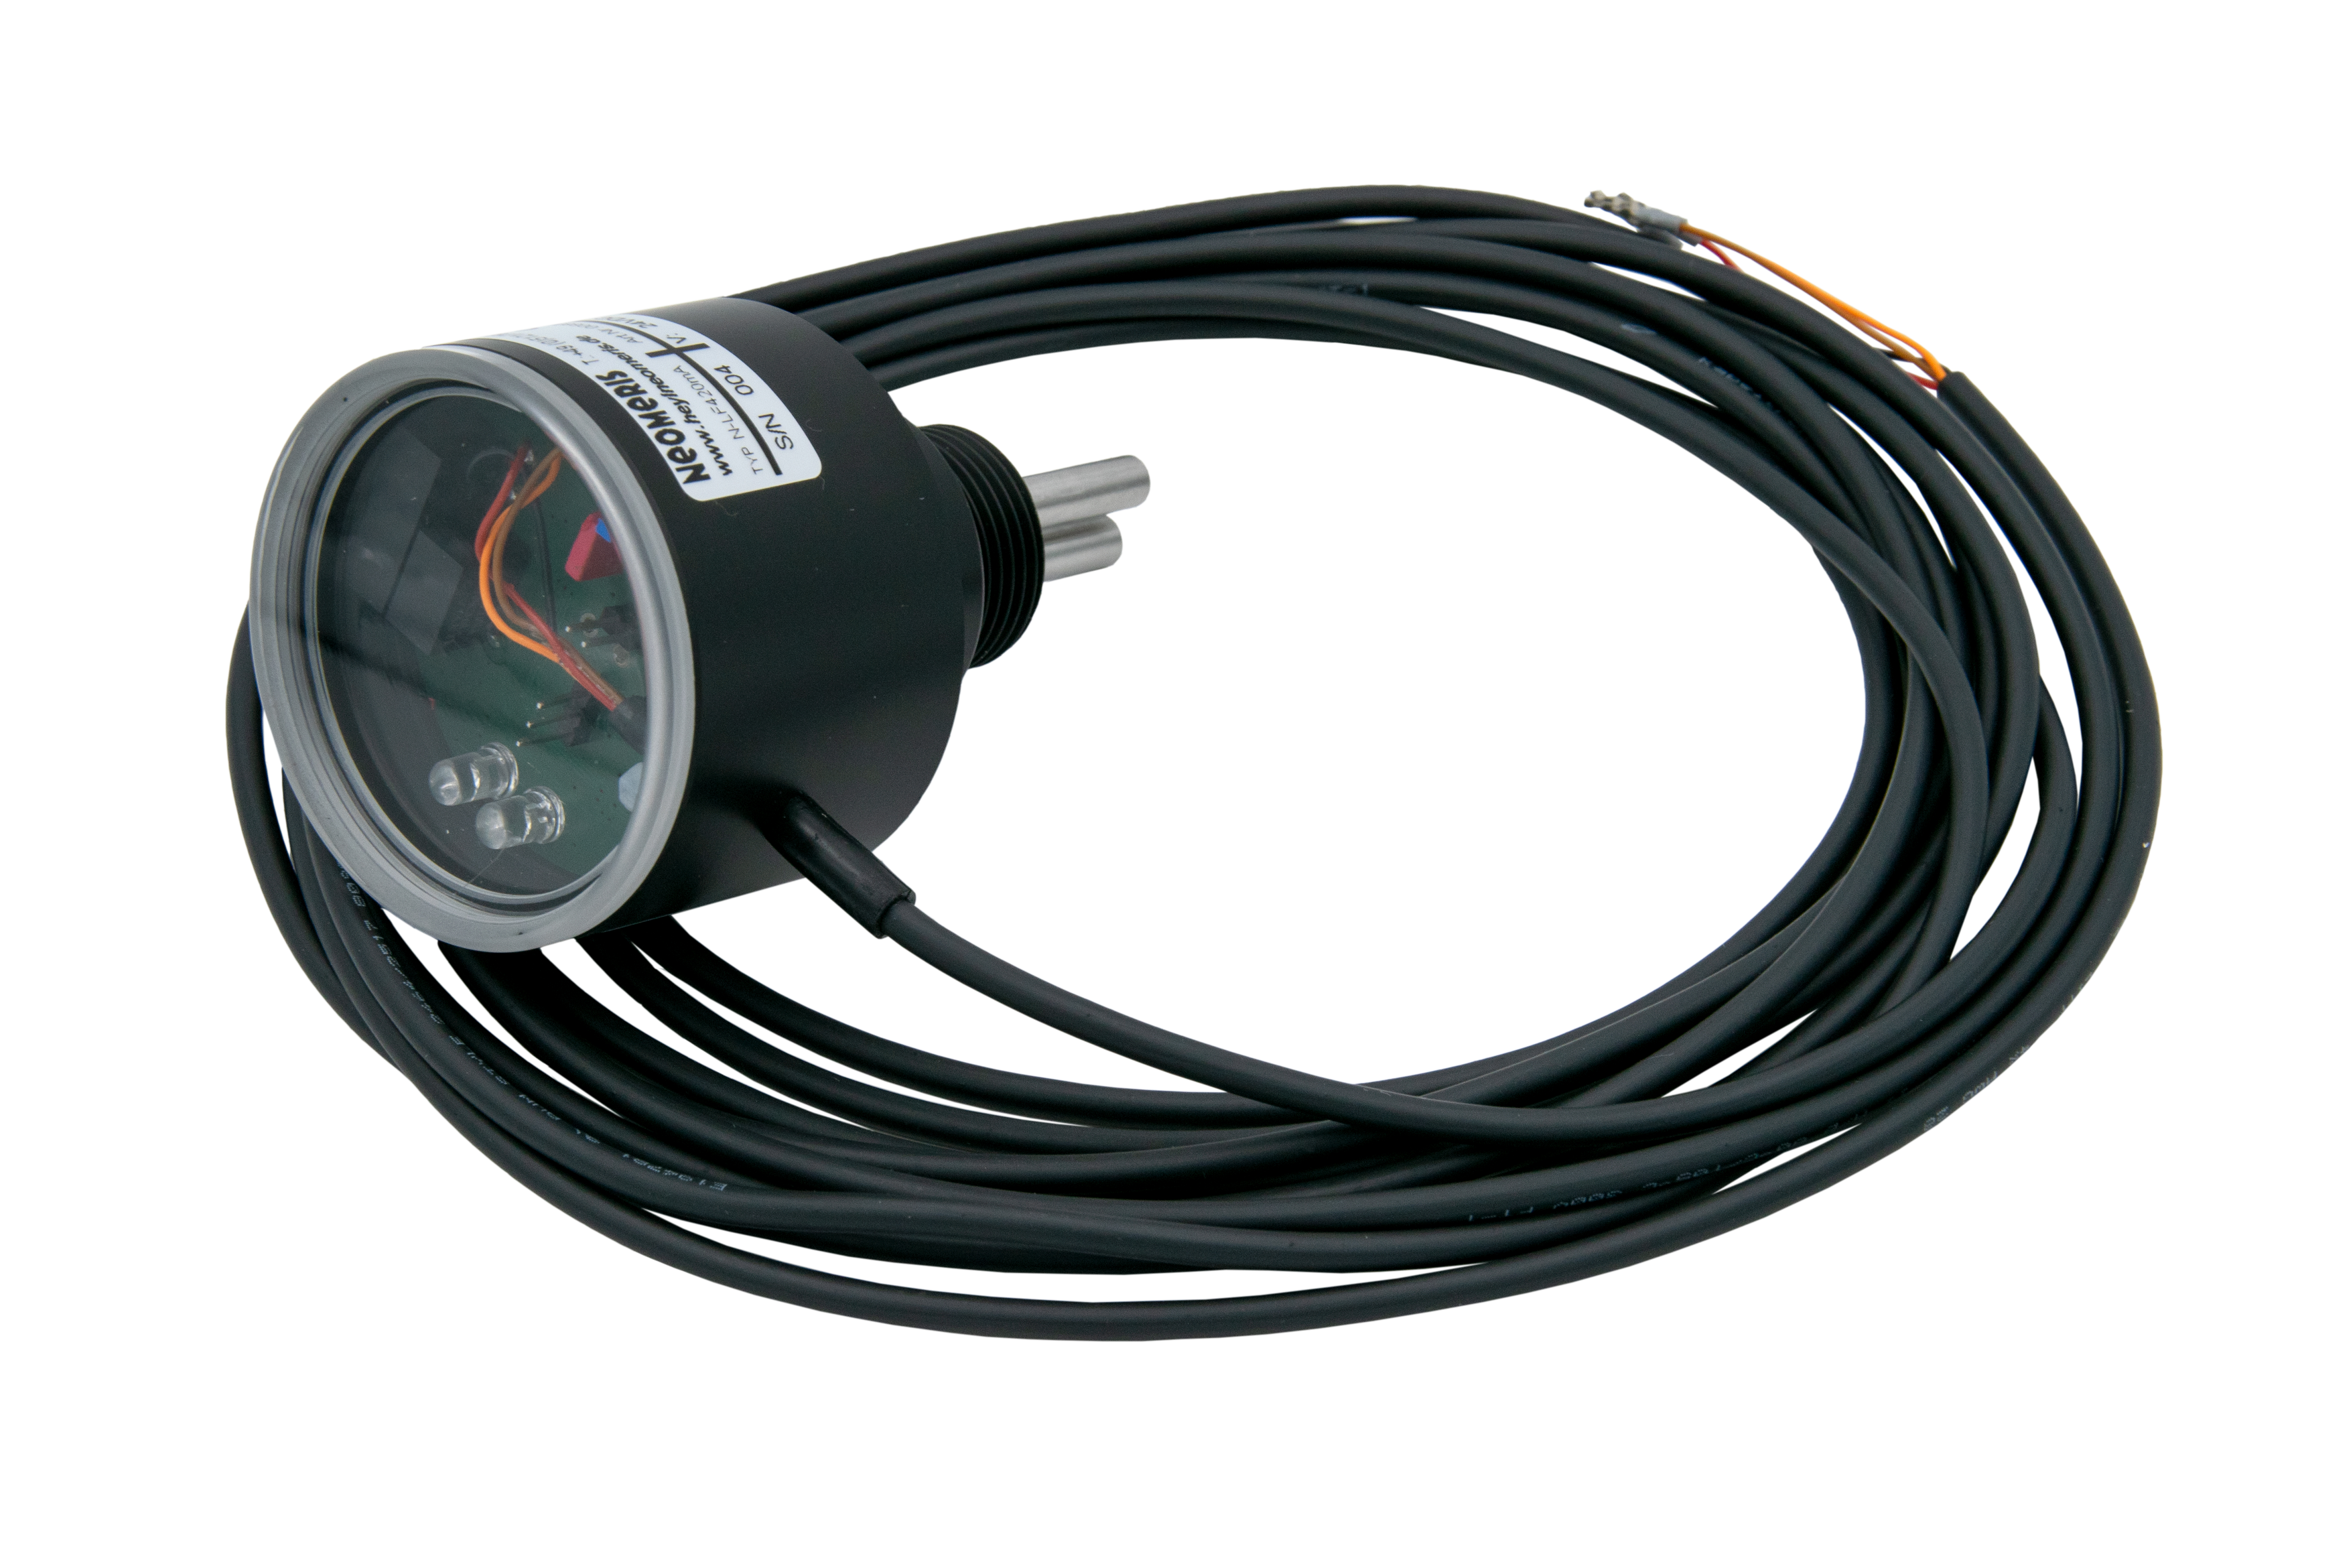 N-LF420 0-2000µS conductivity meter with 4-20mA output, LED display and 3/4 inch screw-in thread